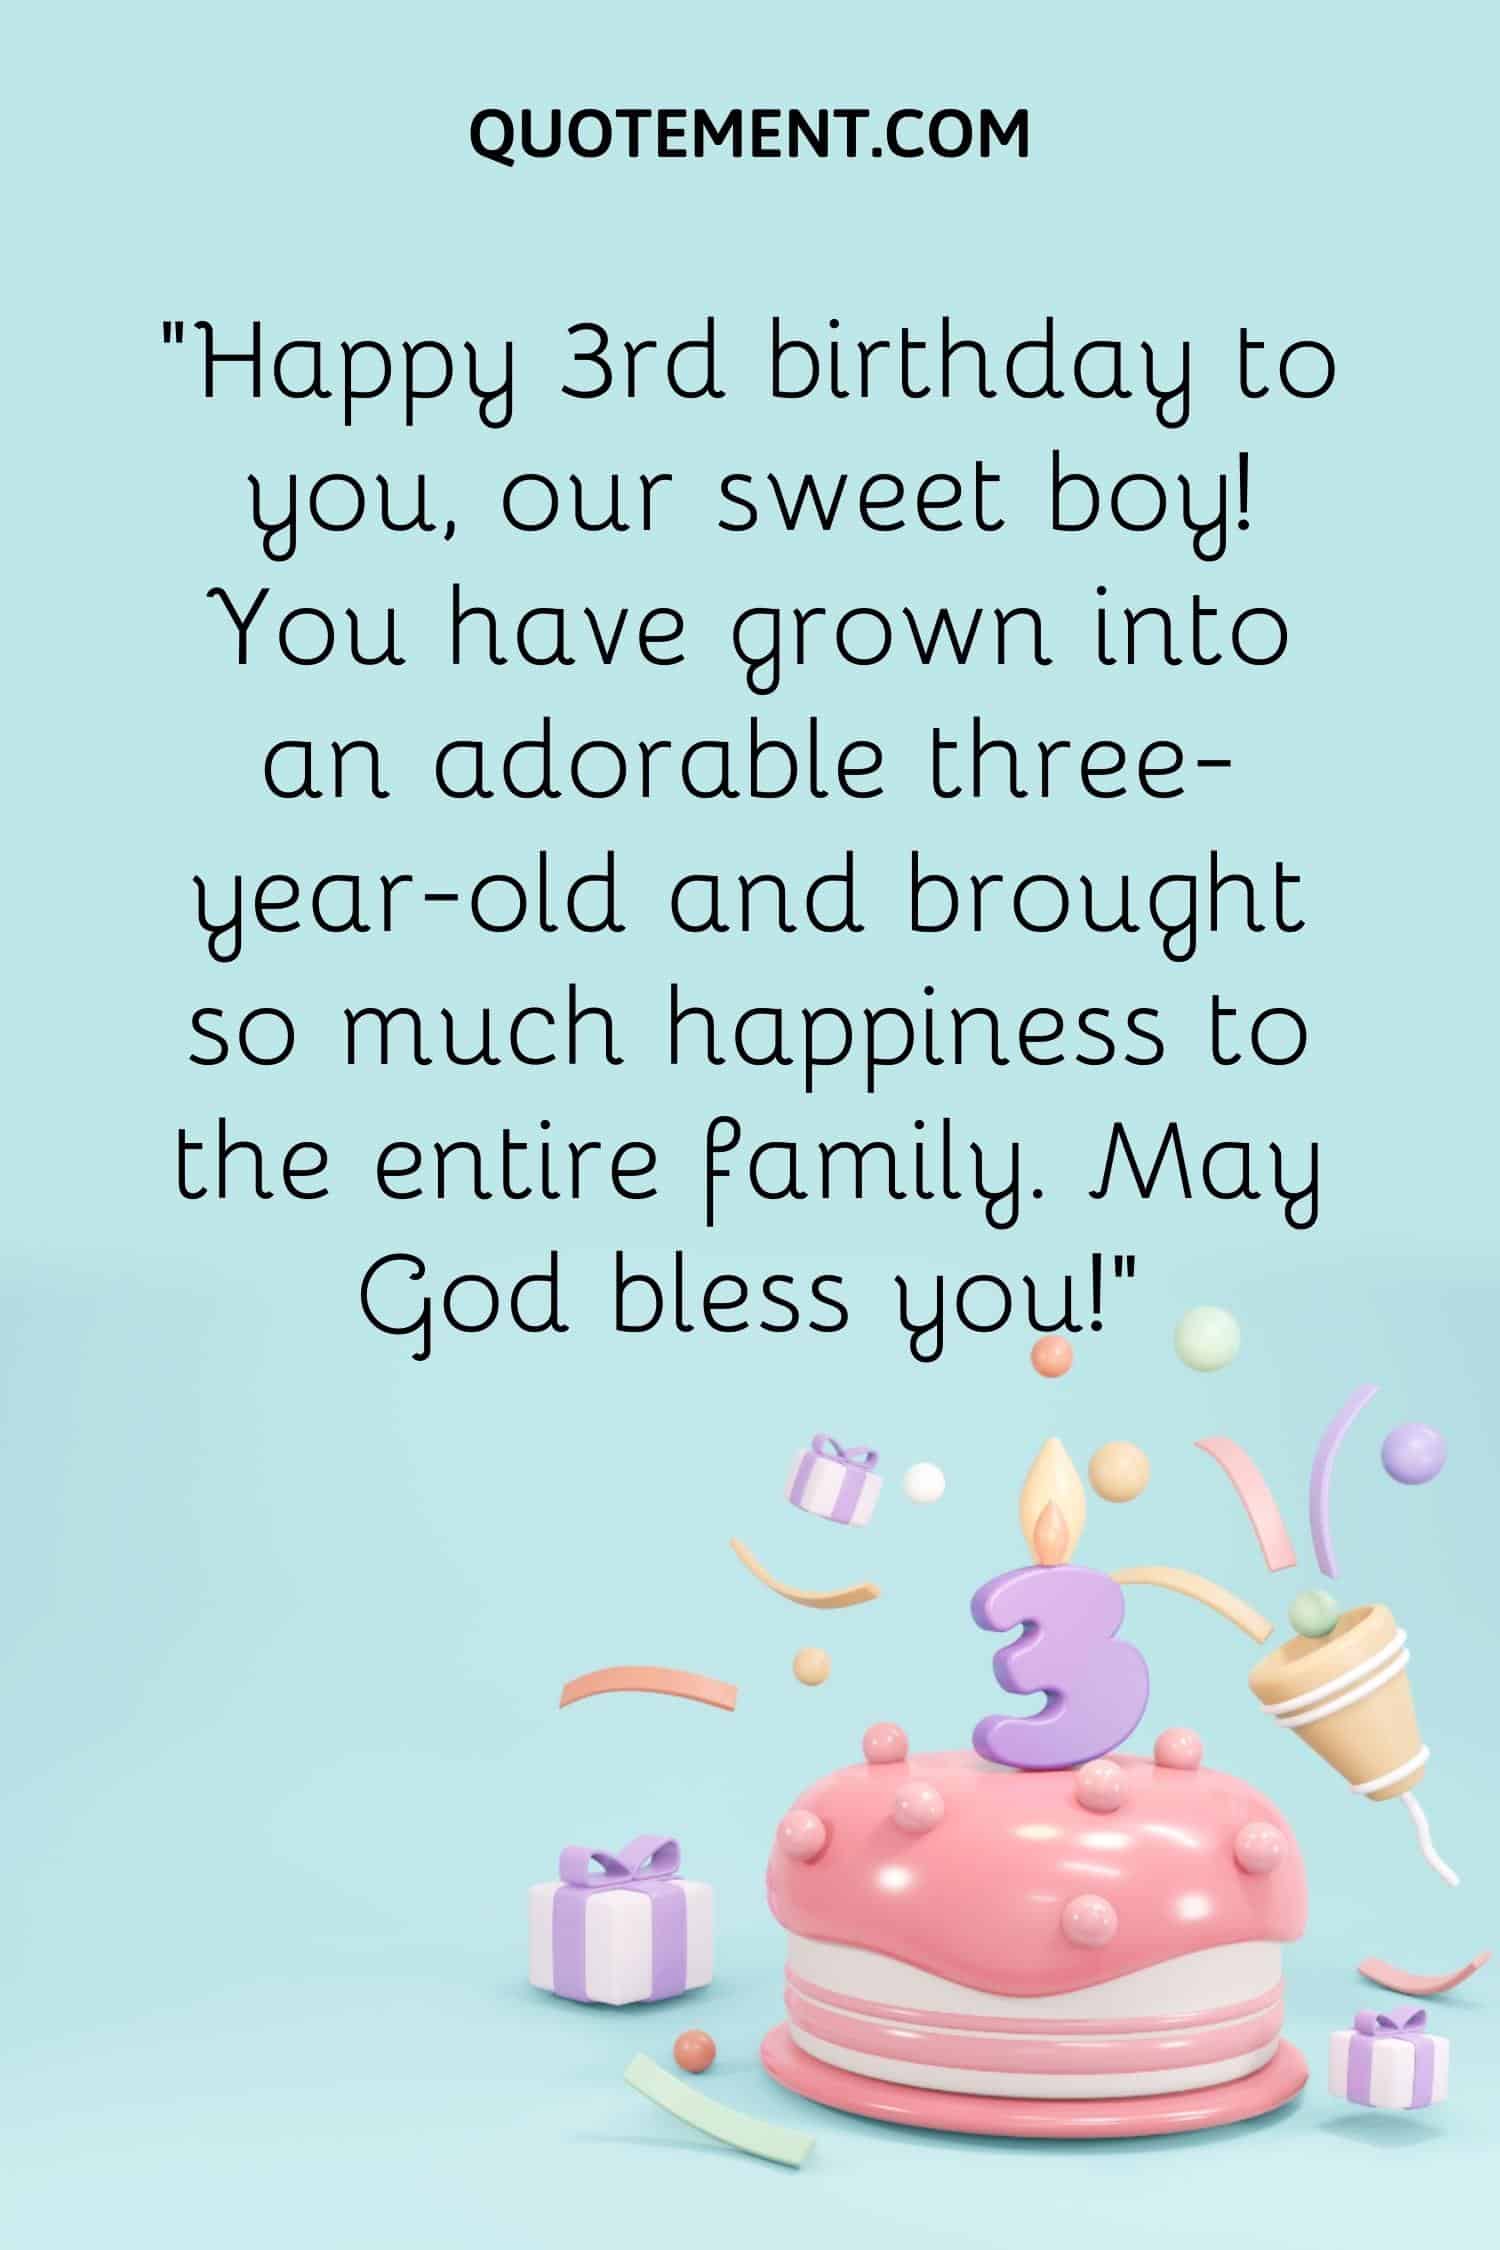 “Happy 3rd birthday to you, our sweet boy! You have grown into an adorable three-year-old and brought so much happiness to the entire family. May God bless you!”